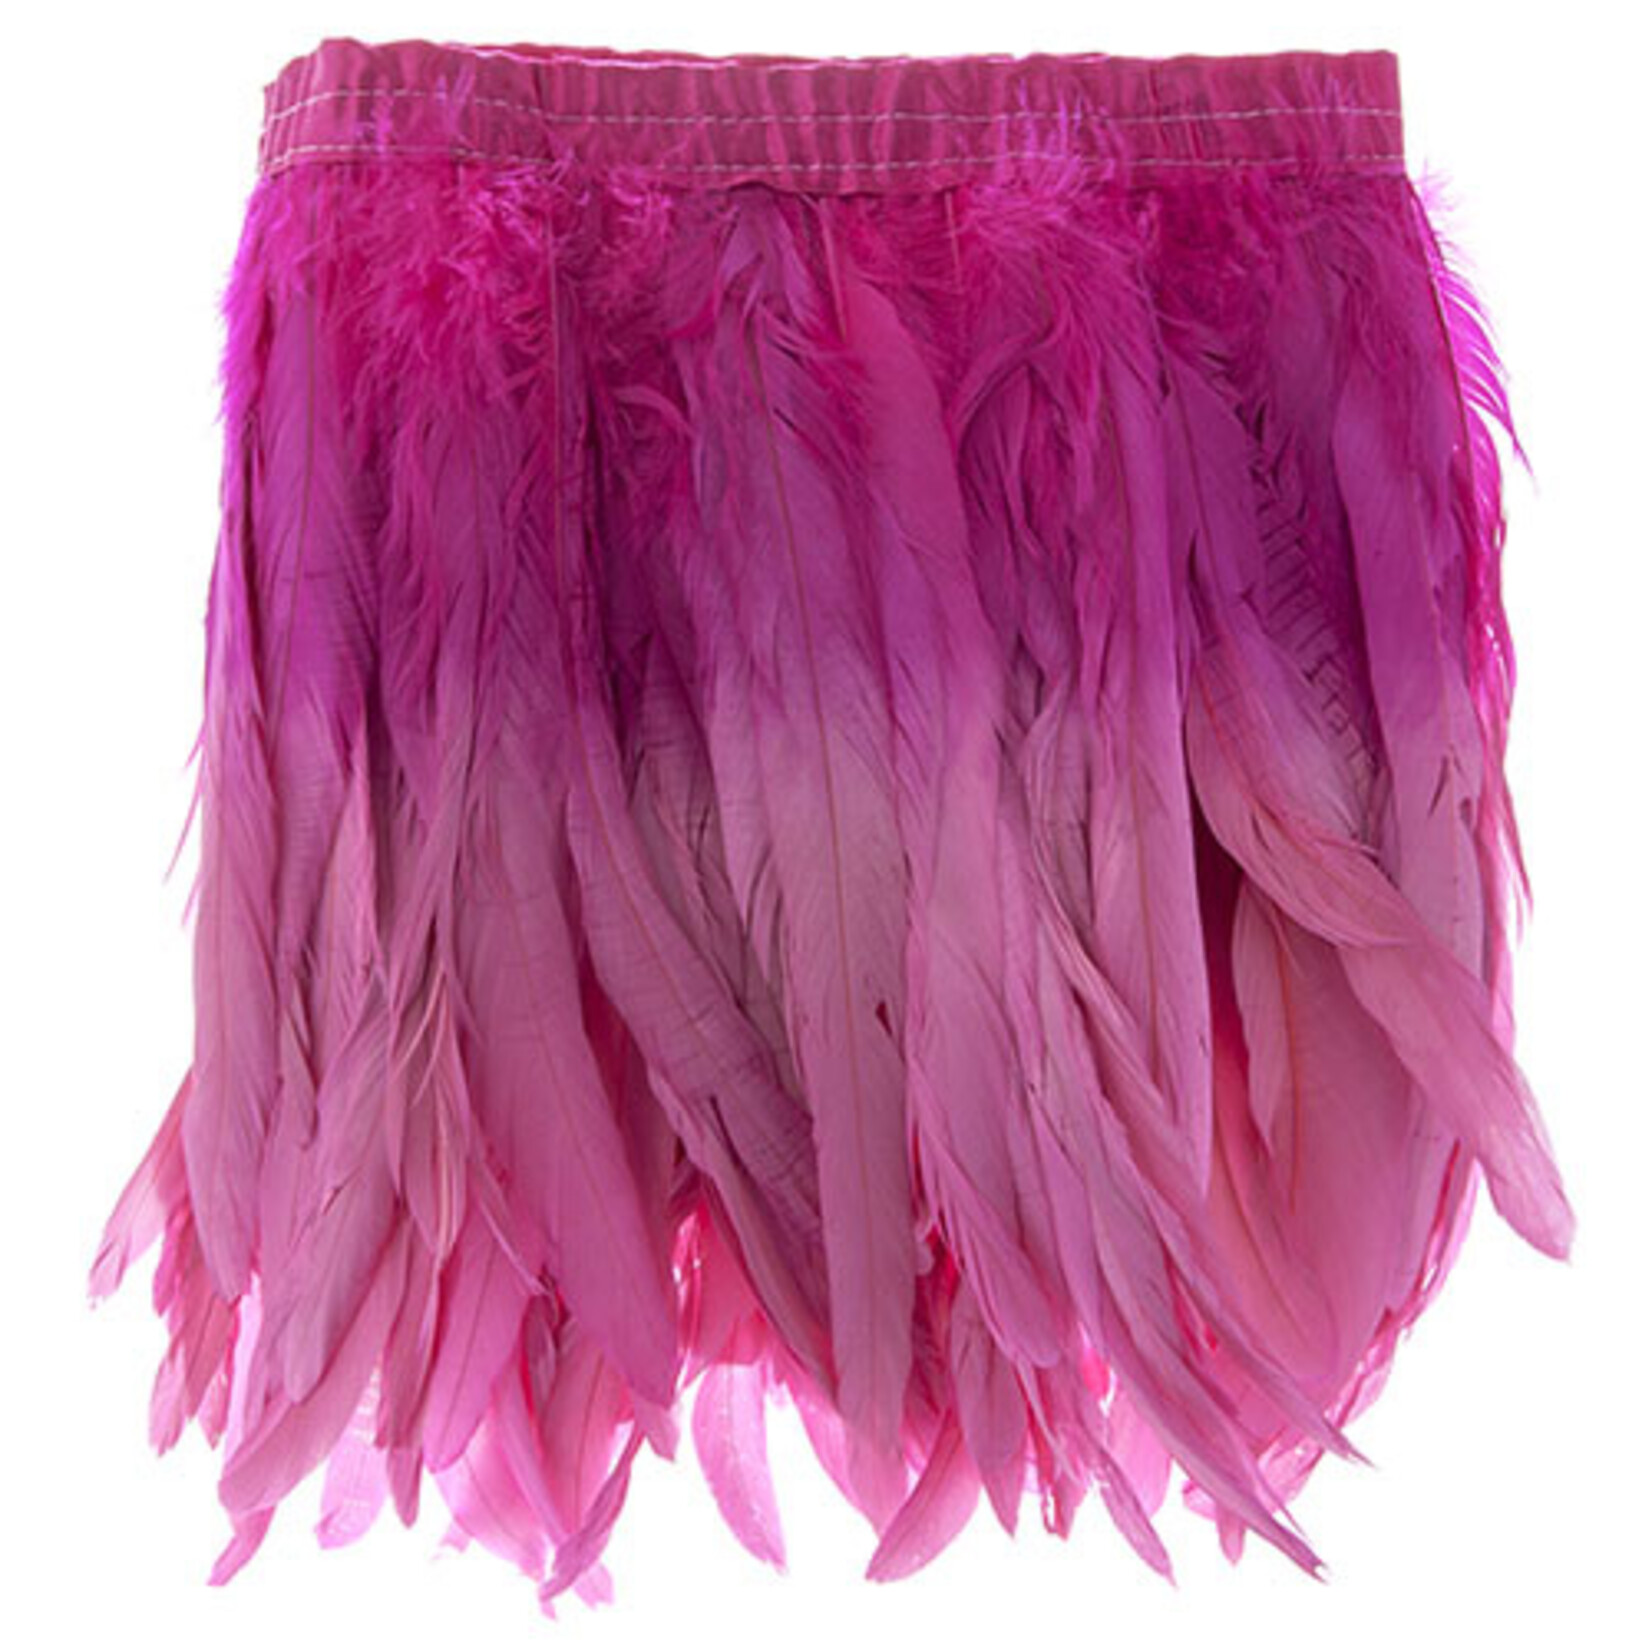 Coque Feathers Value 2 Tone 10 - 12 Inches 1 Yard  Pretty In Pink